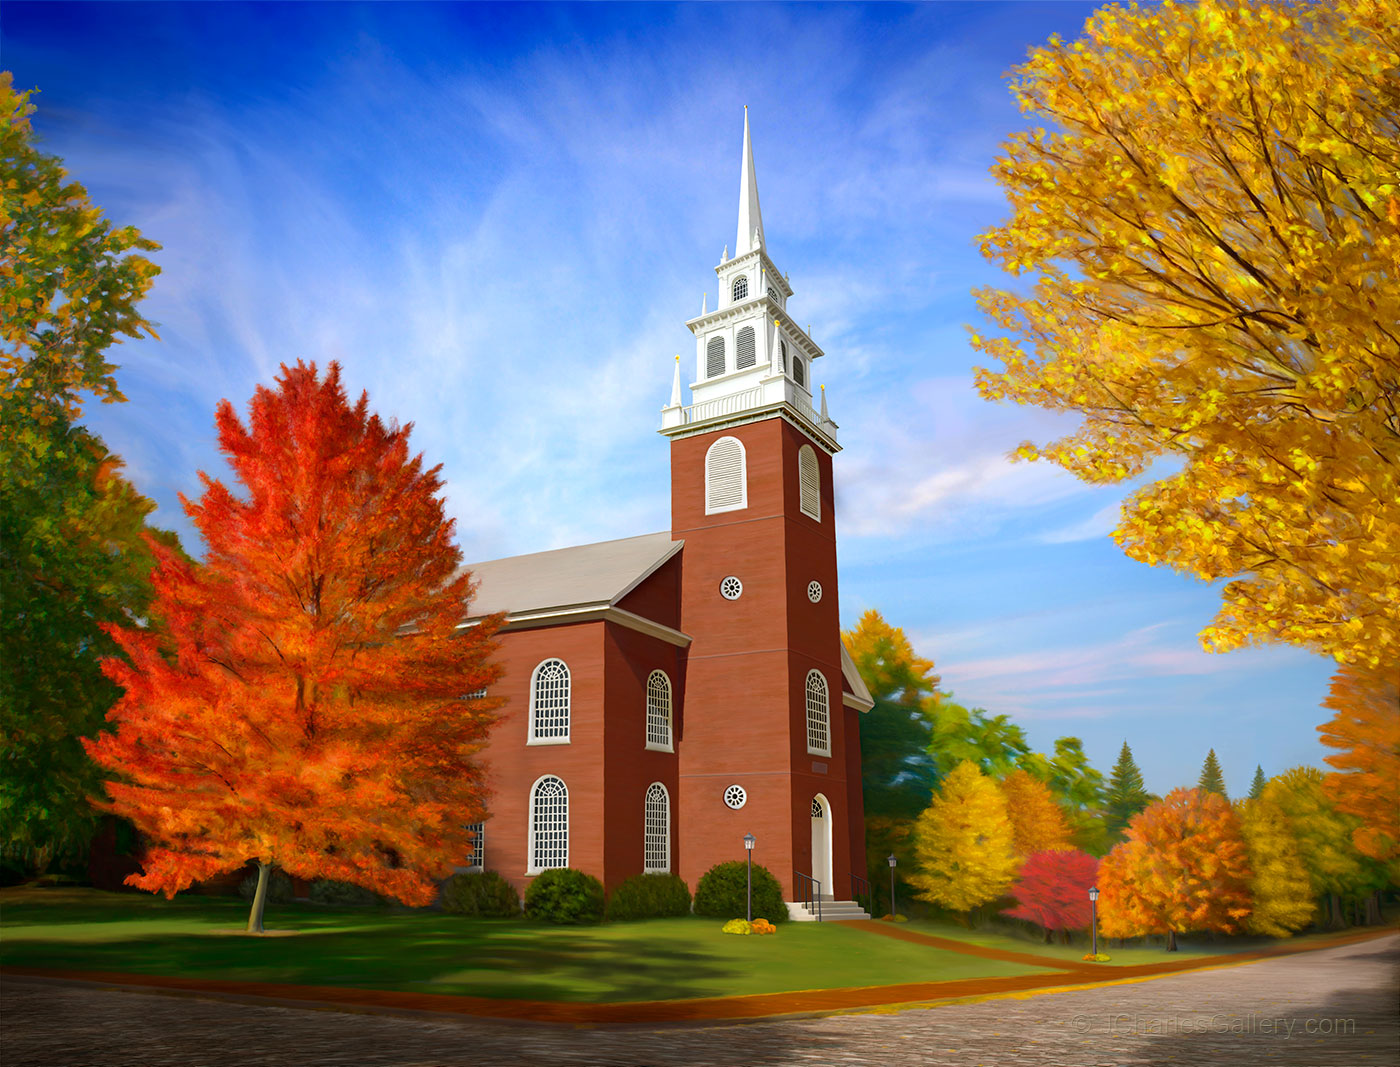 The Old North Church Painting By Artist J Charles Featuring The Historic Boston Massachusetts Church